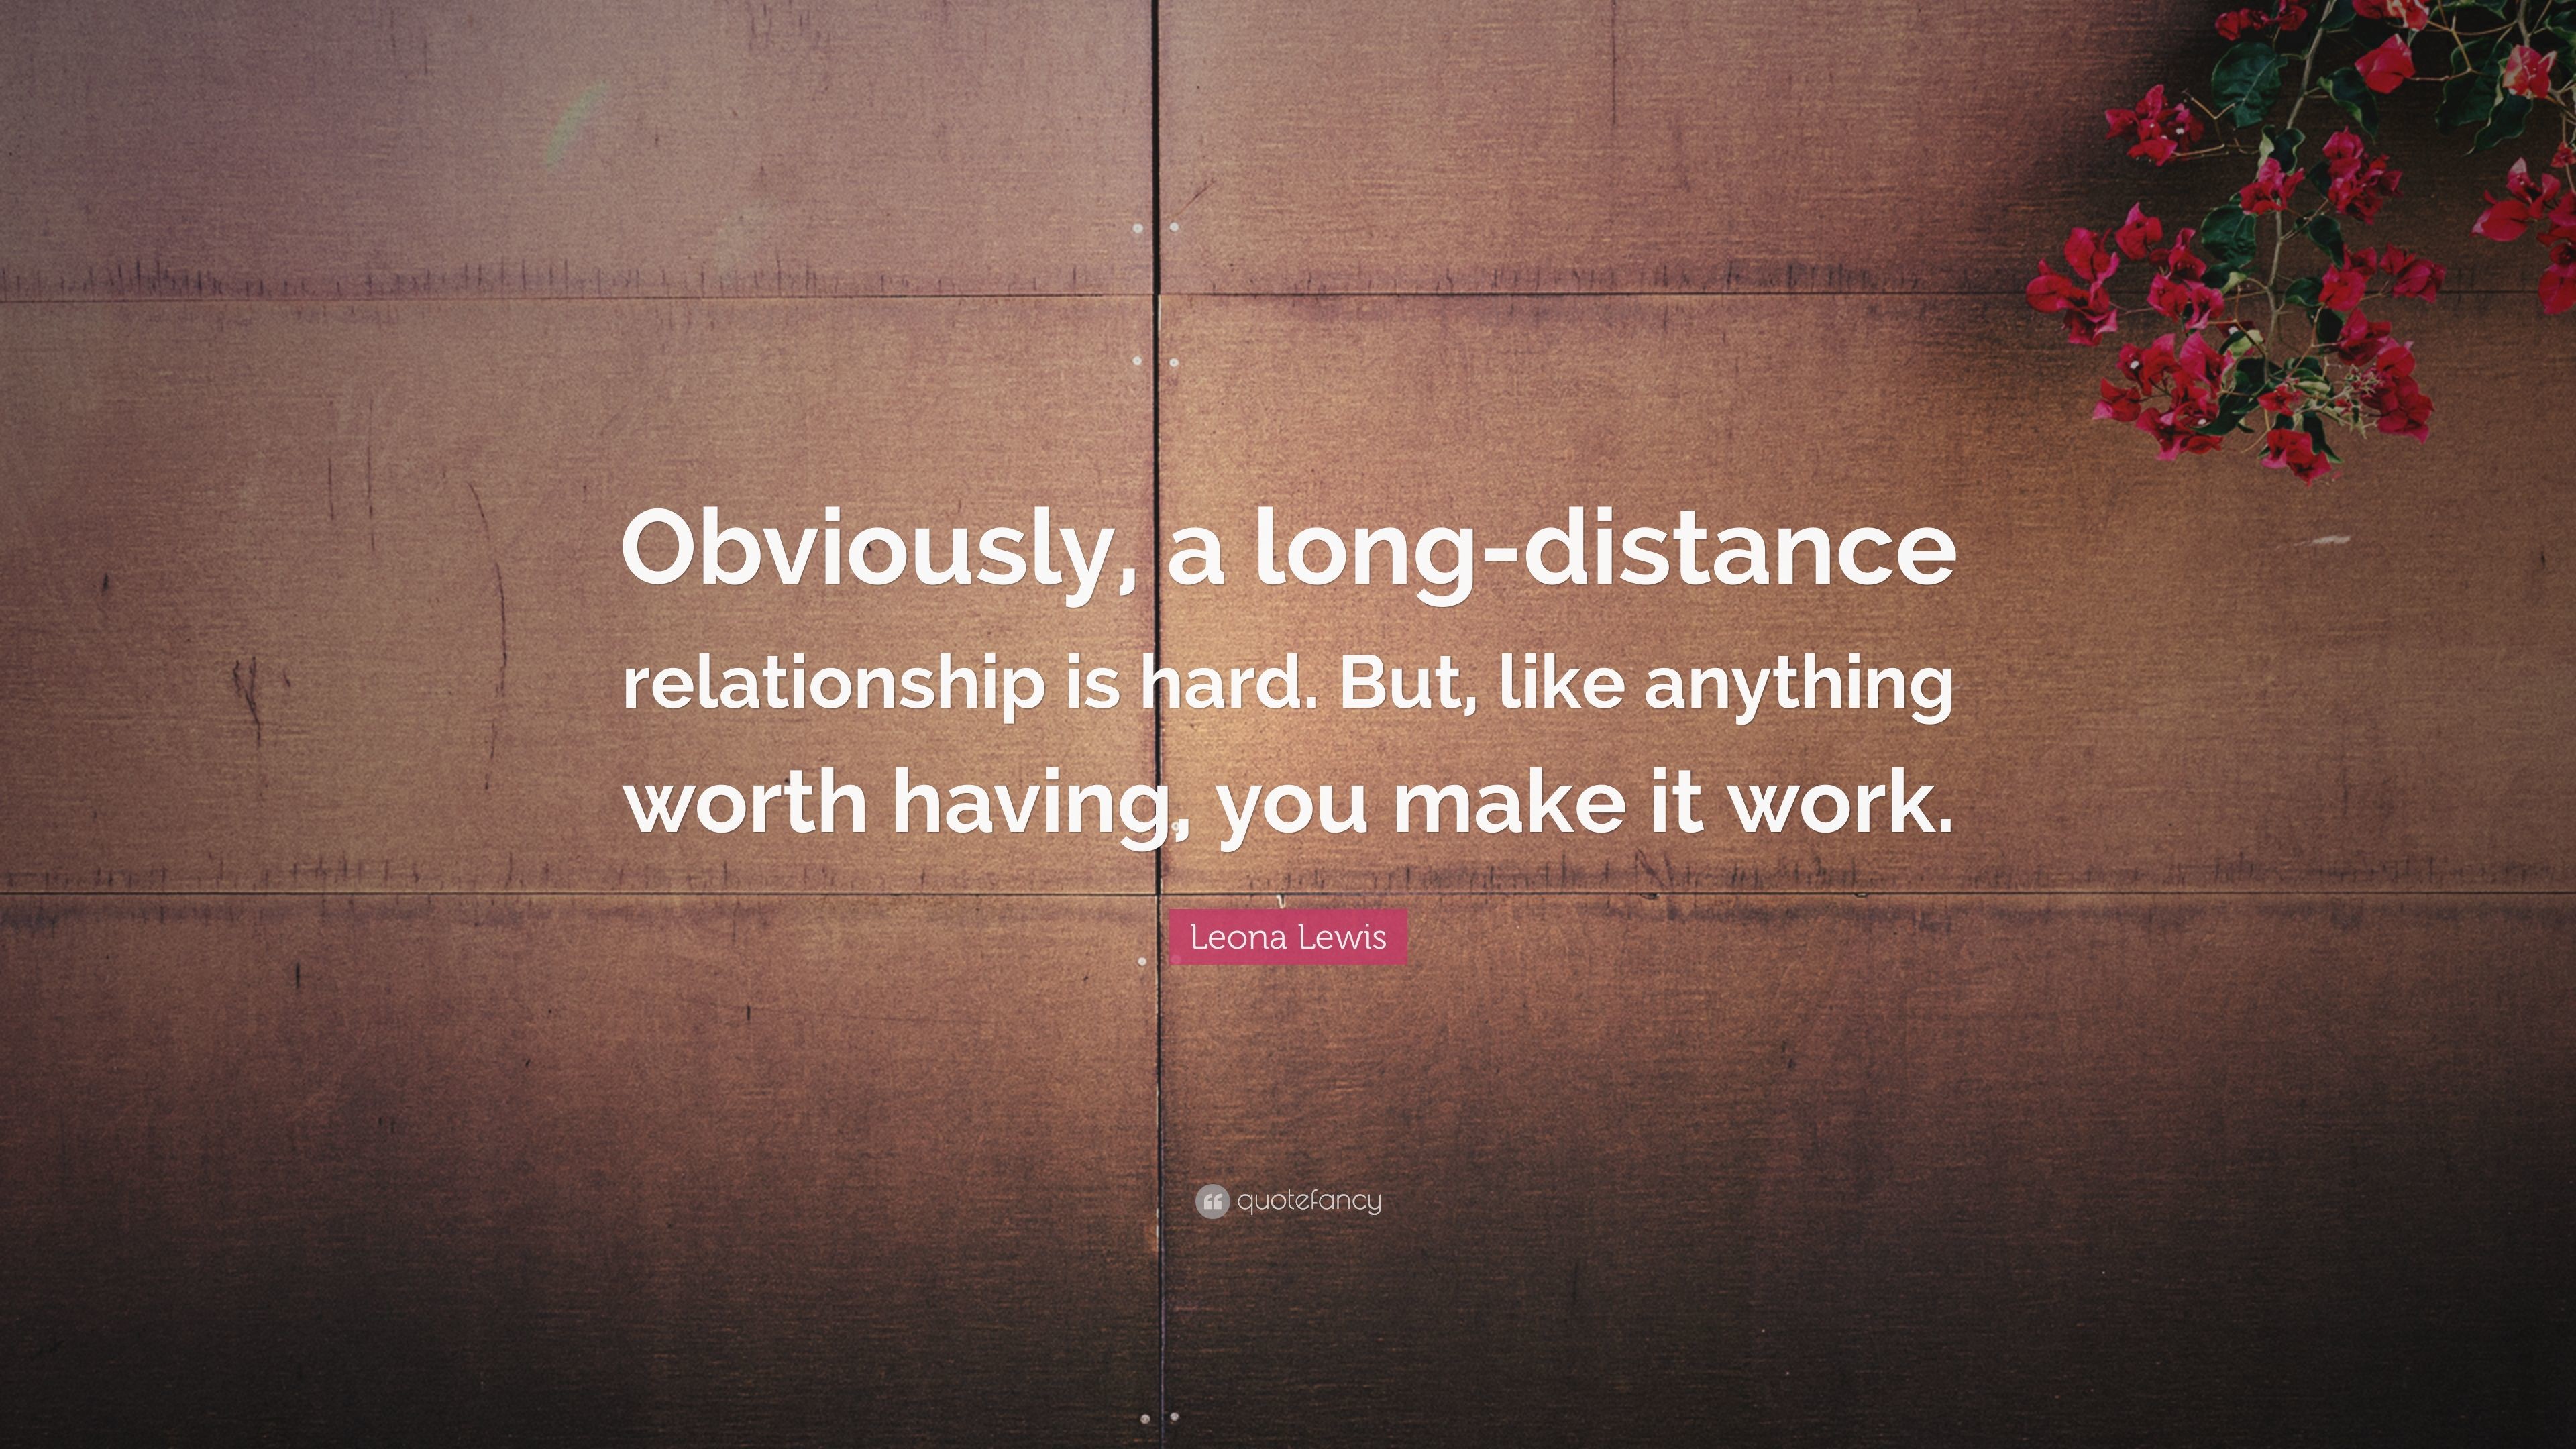 3840x2160 Leona Lewis Quote: “Obviously, a long-distance relationship is hard. But